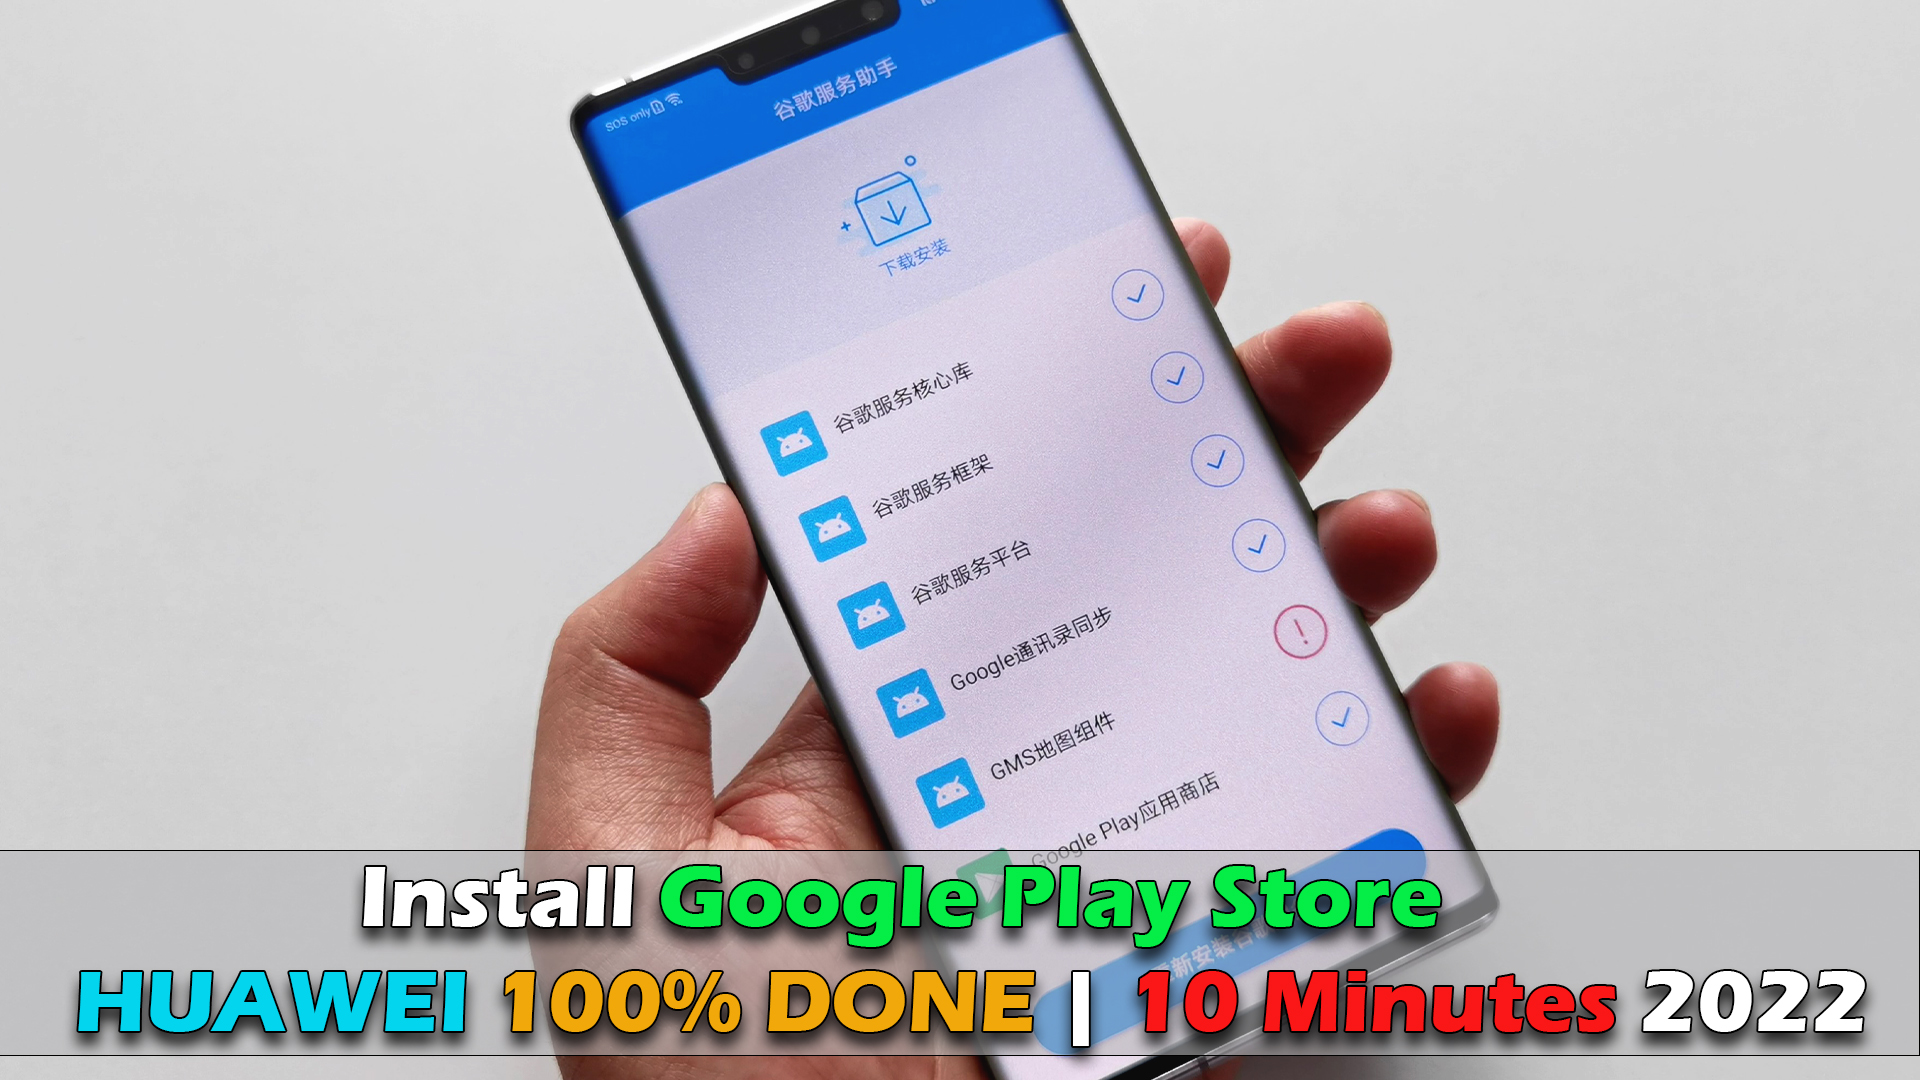 Install Fastest Google Play Store On Huawei With 100% DONE - ICTfix